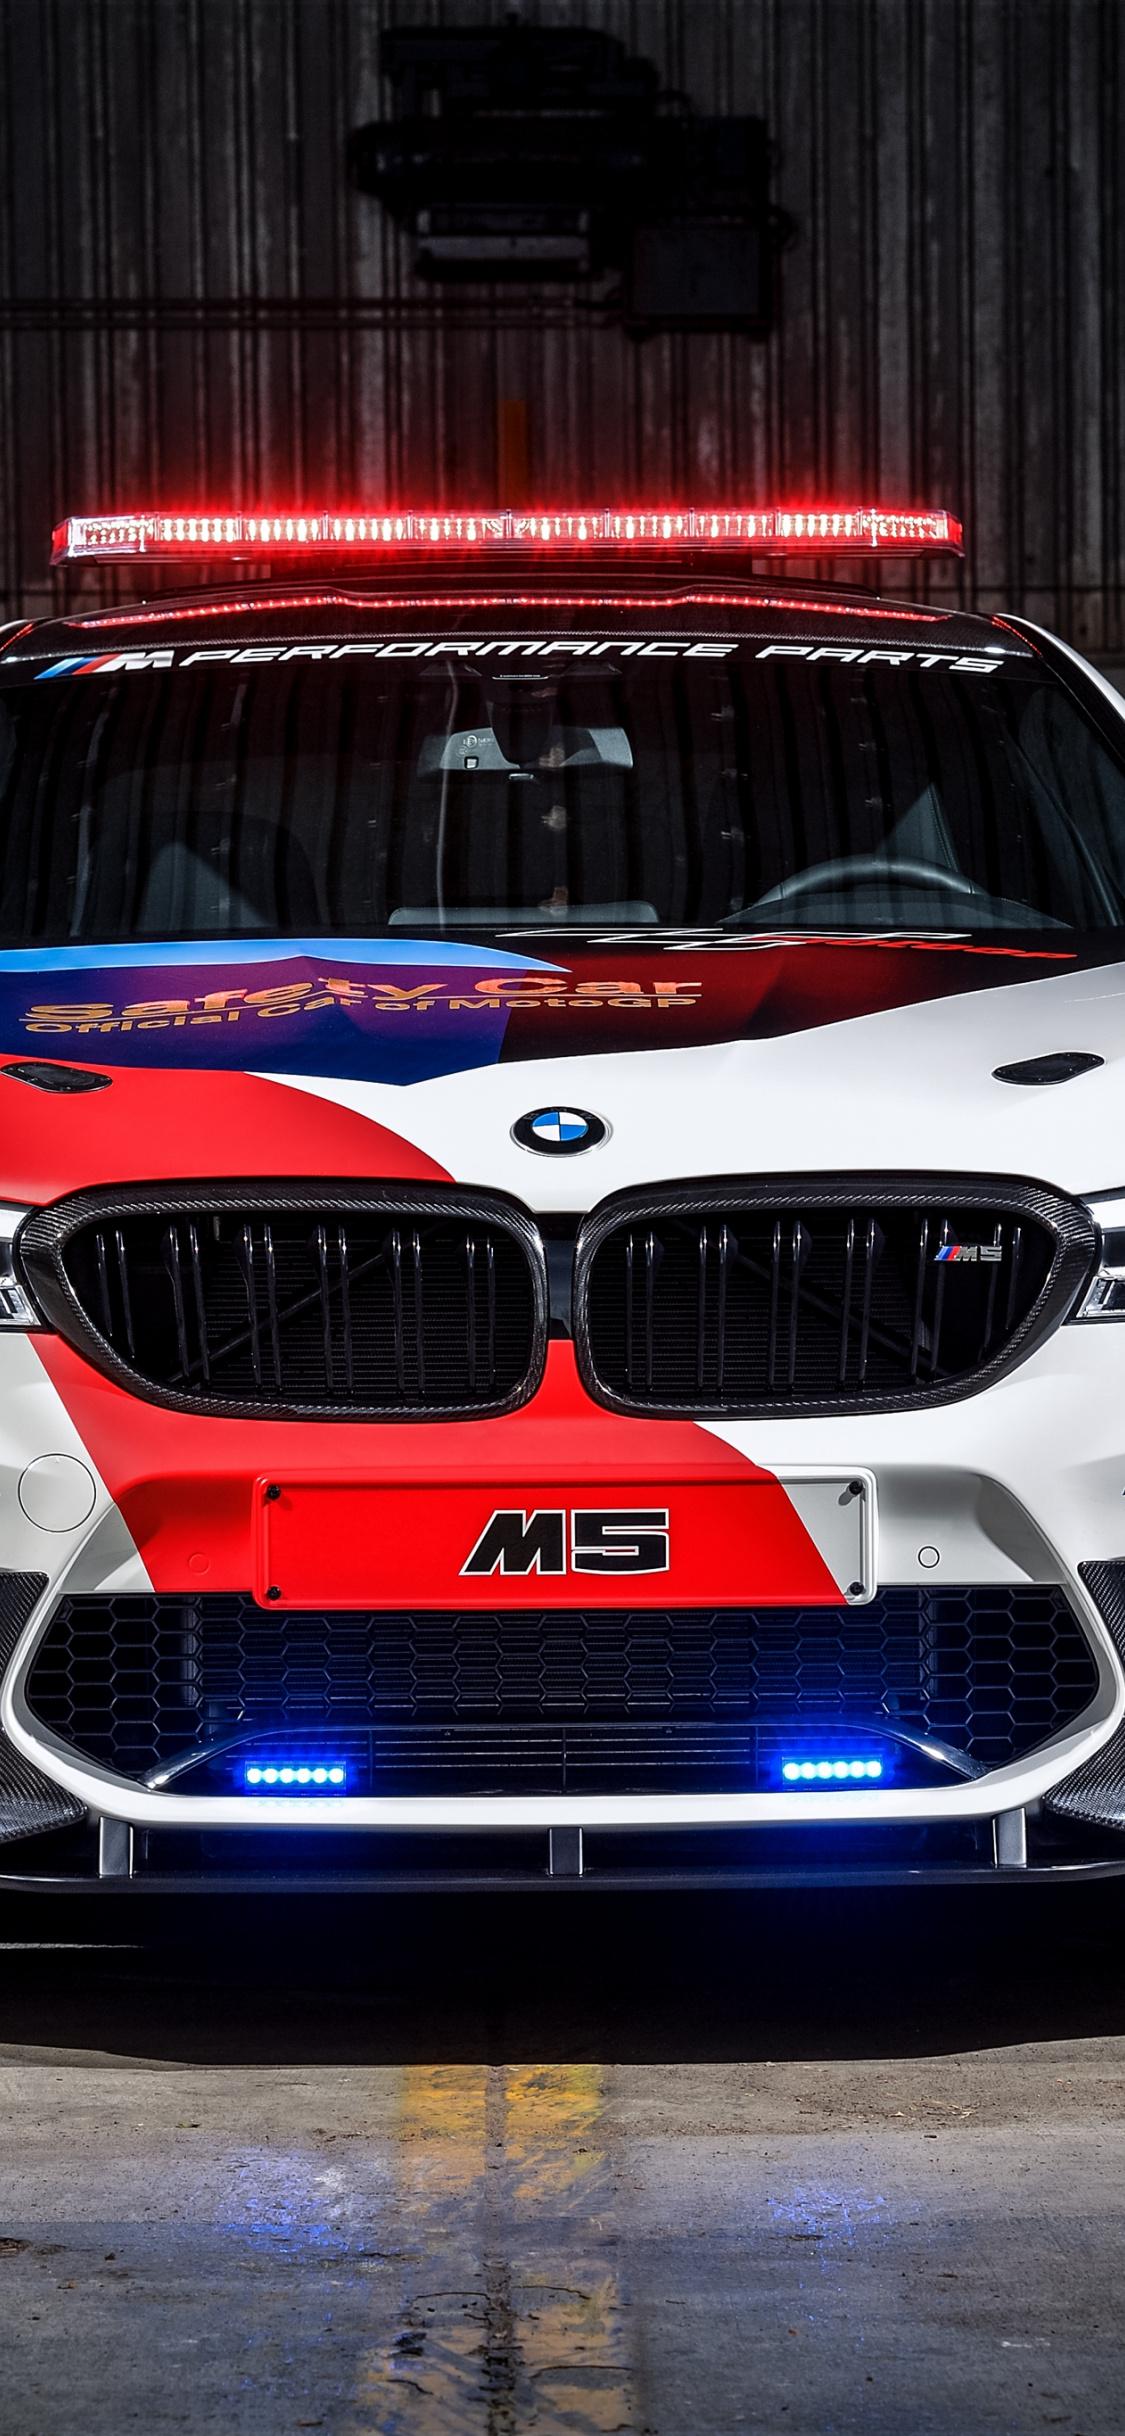 Download 1125x2436 wallpaper bmw m5 motogp safety car, front, iphone x 1125x2436 HD image, background, 737